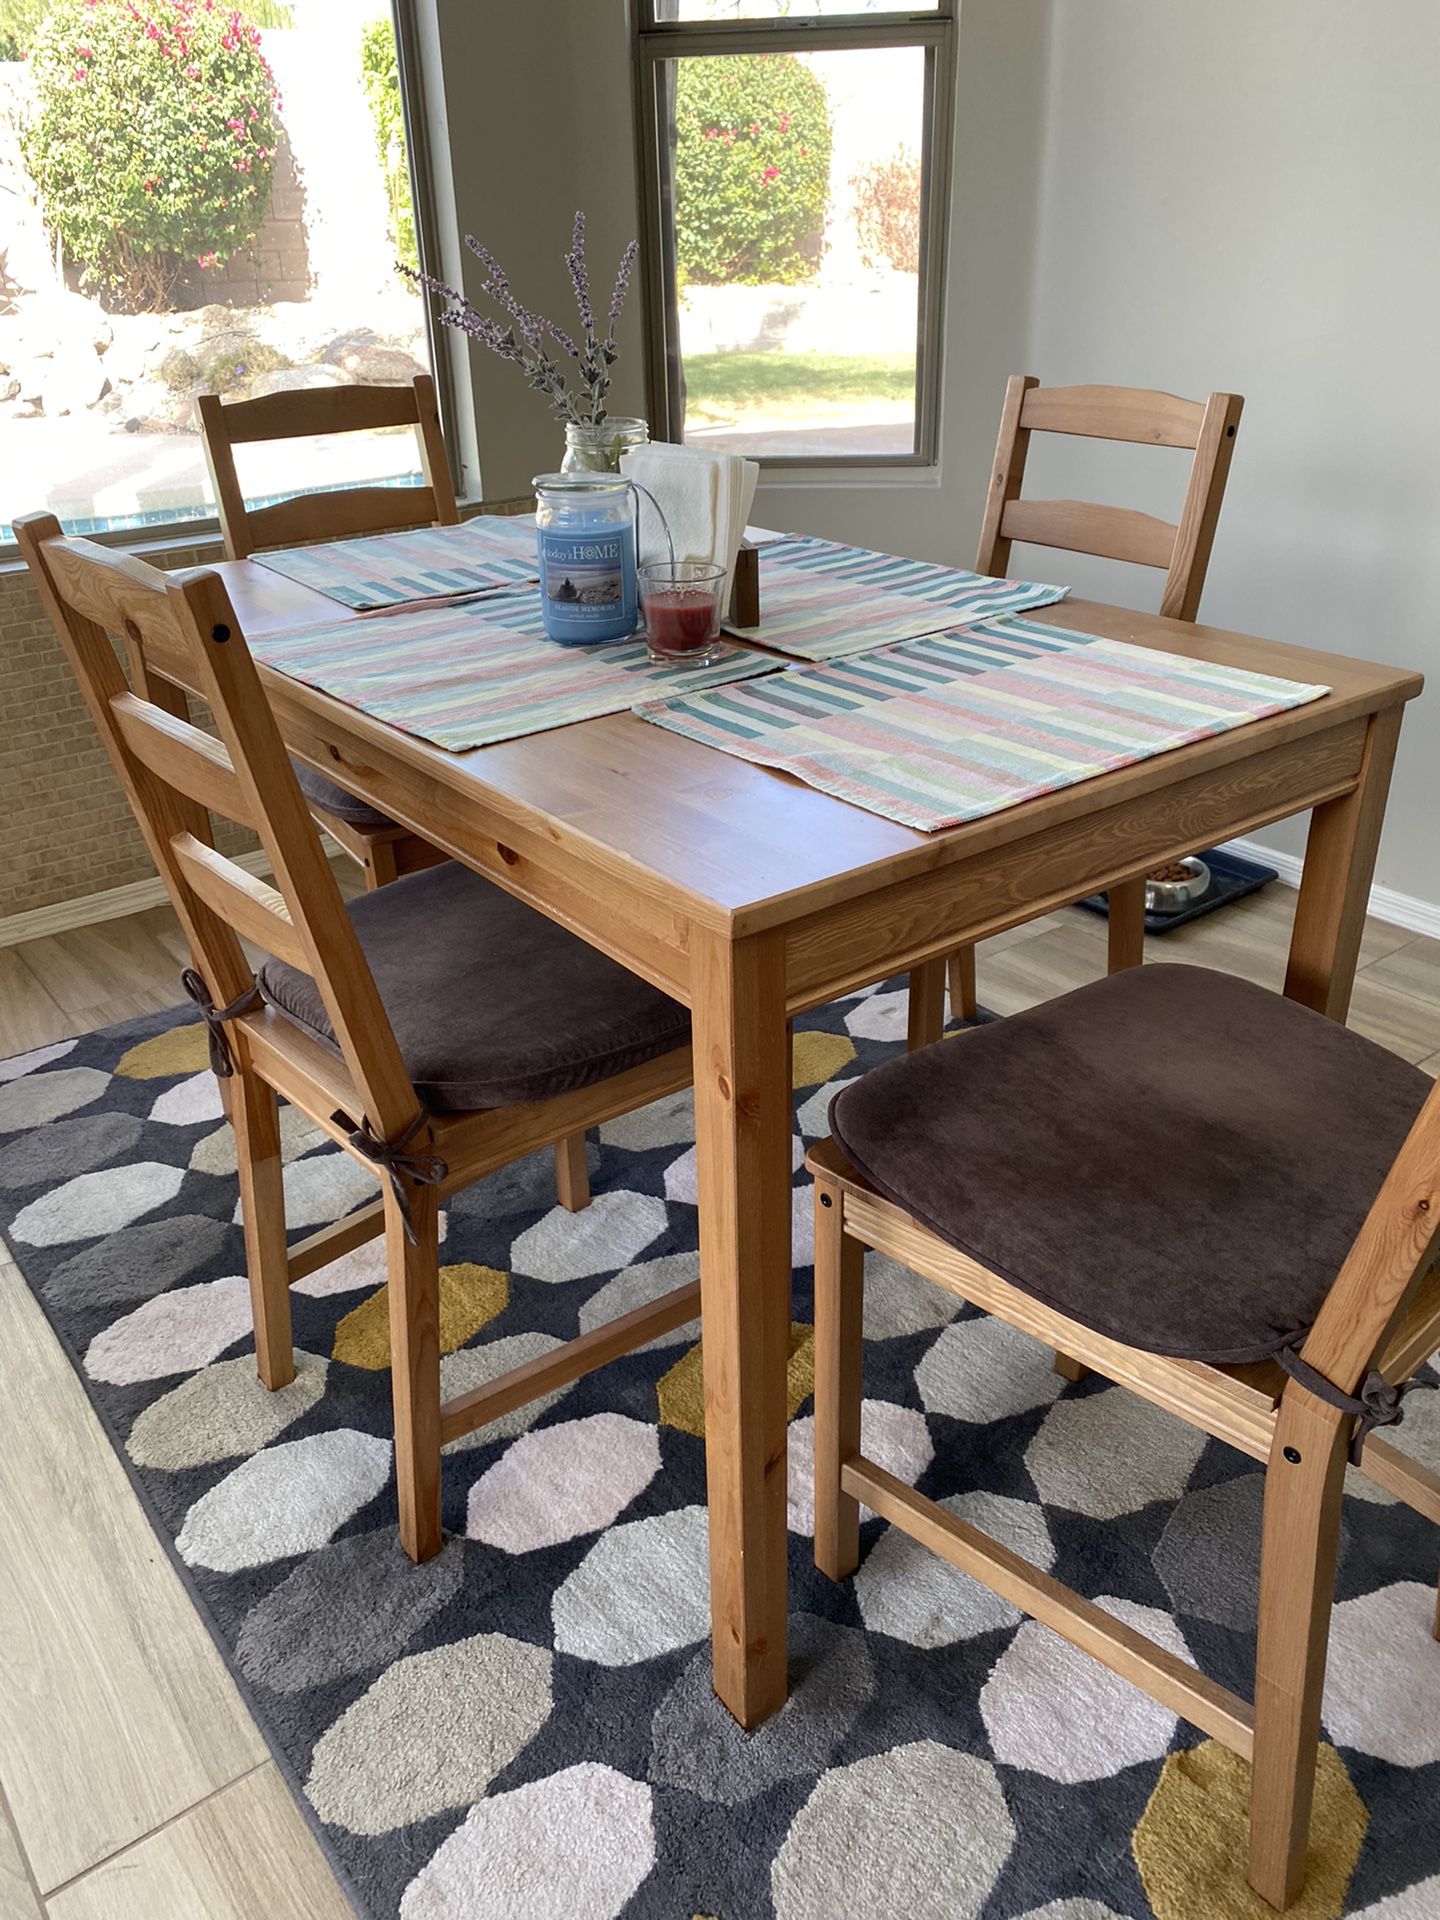 Wooden table and chairs kitchen set